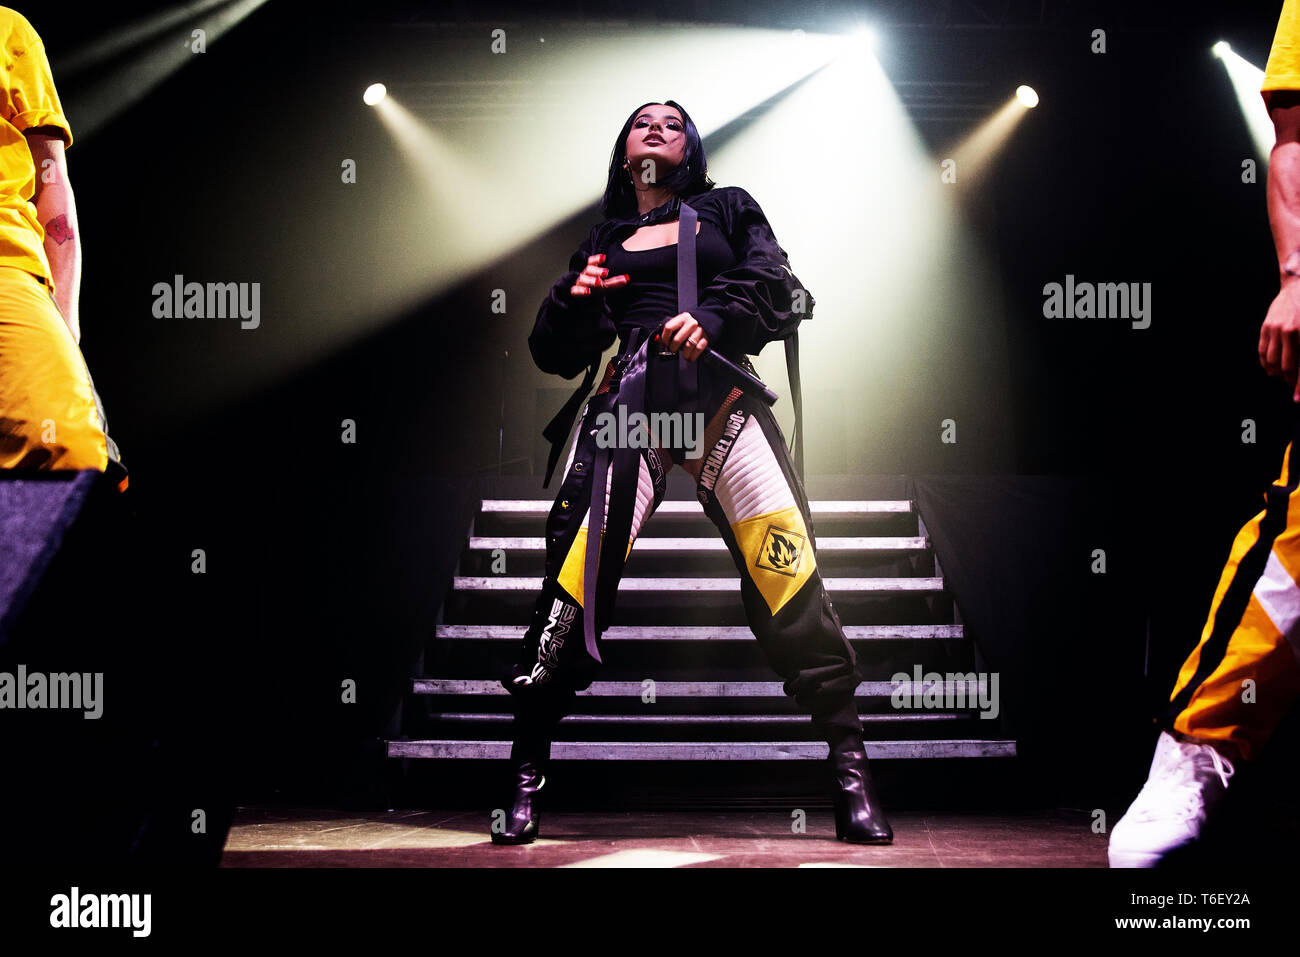 BARCELONA - OCT 7: Becky G (latino pop and reggaeton band) perform in concert at Razzmatazz stage on October 7, 2018 in Barcelona, Spain. Stock Photo